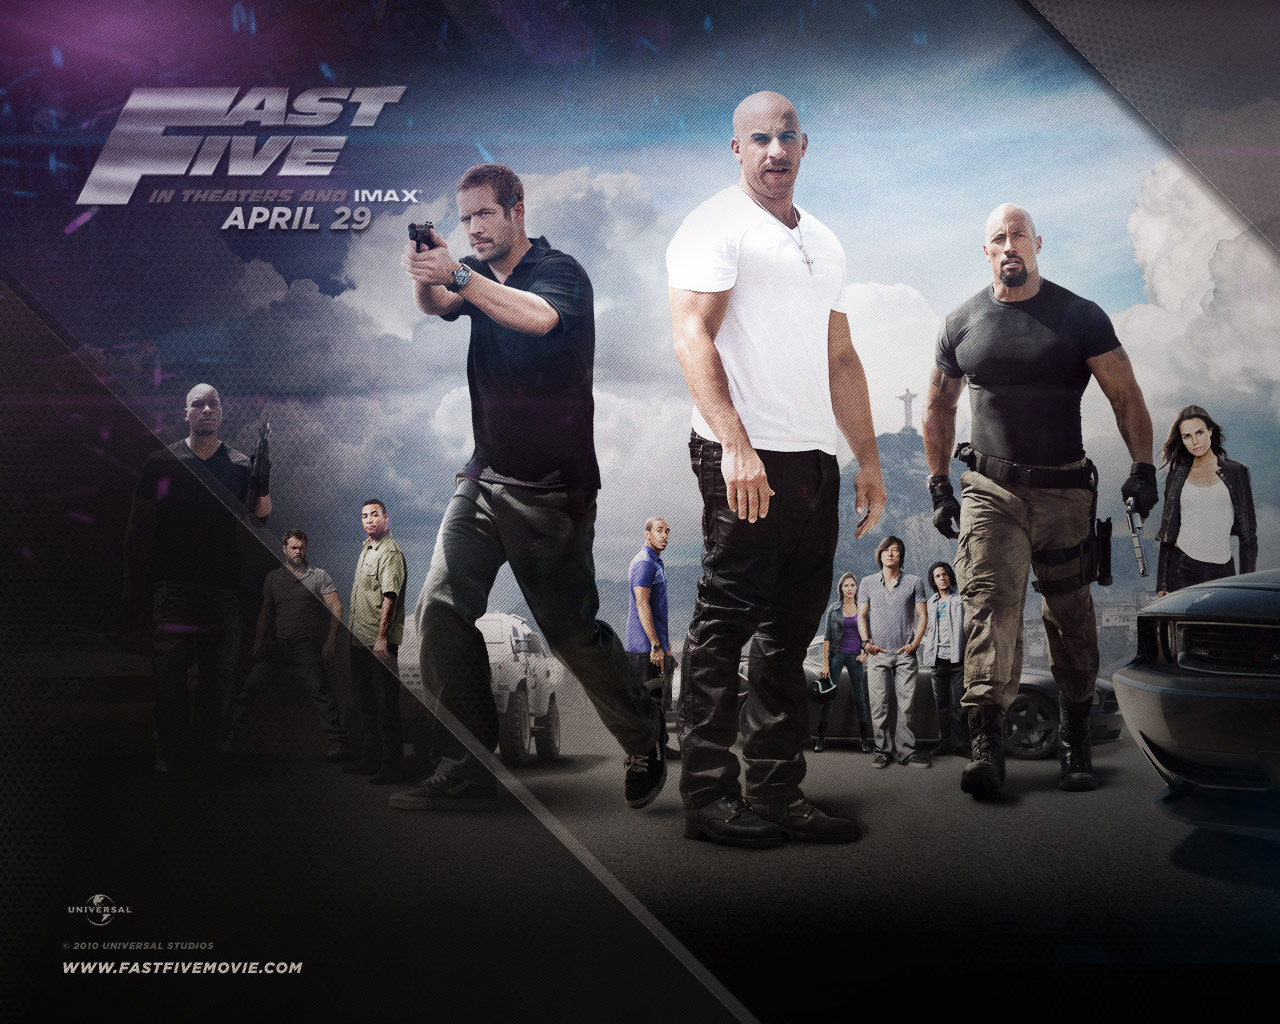 wallpapers | Hollywood movies wallpapers: Fast Five hd wallpapers